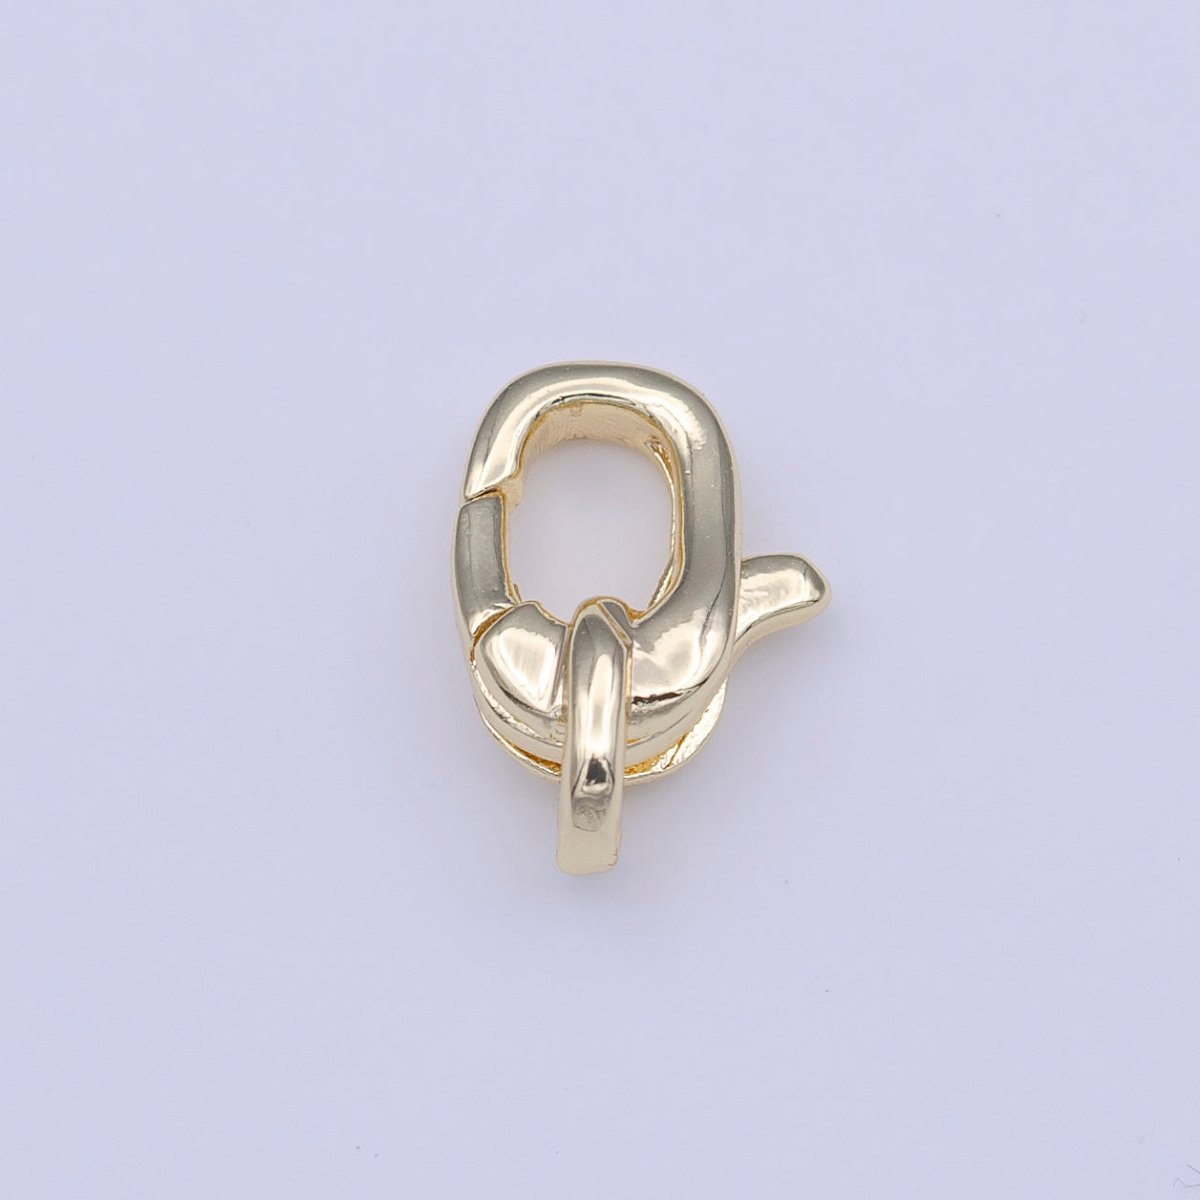 Gold Unique 11mm x 7.5mm Lobster Claw Clasps Jewelry Making Closure Supply | K-272 - DLUXCA